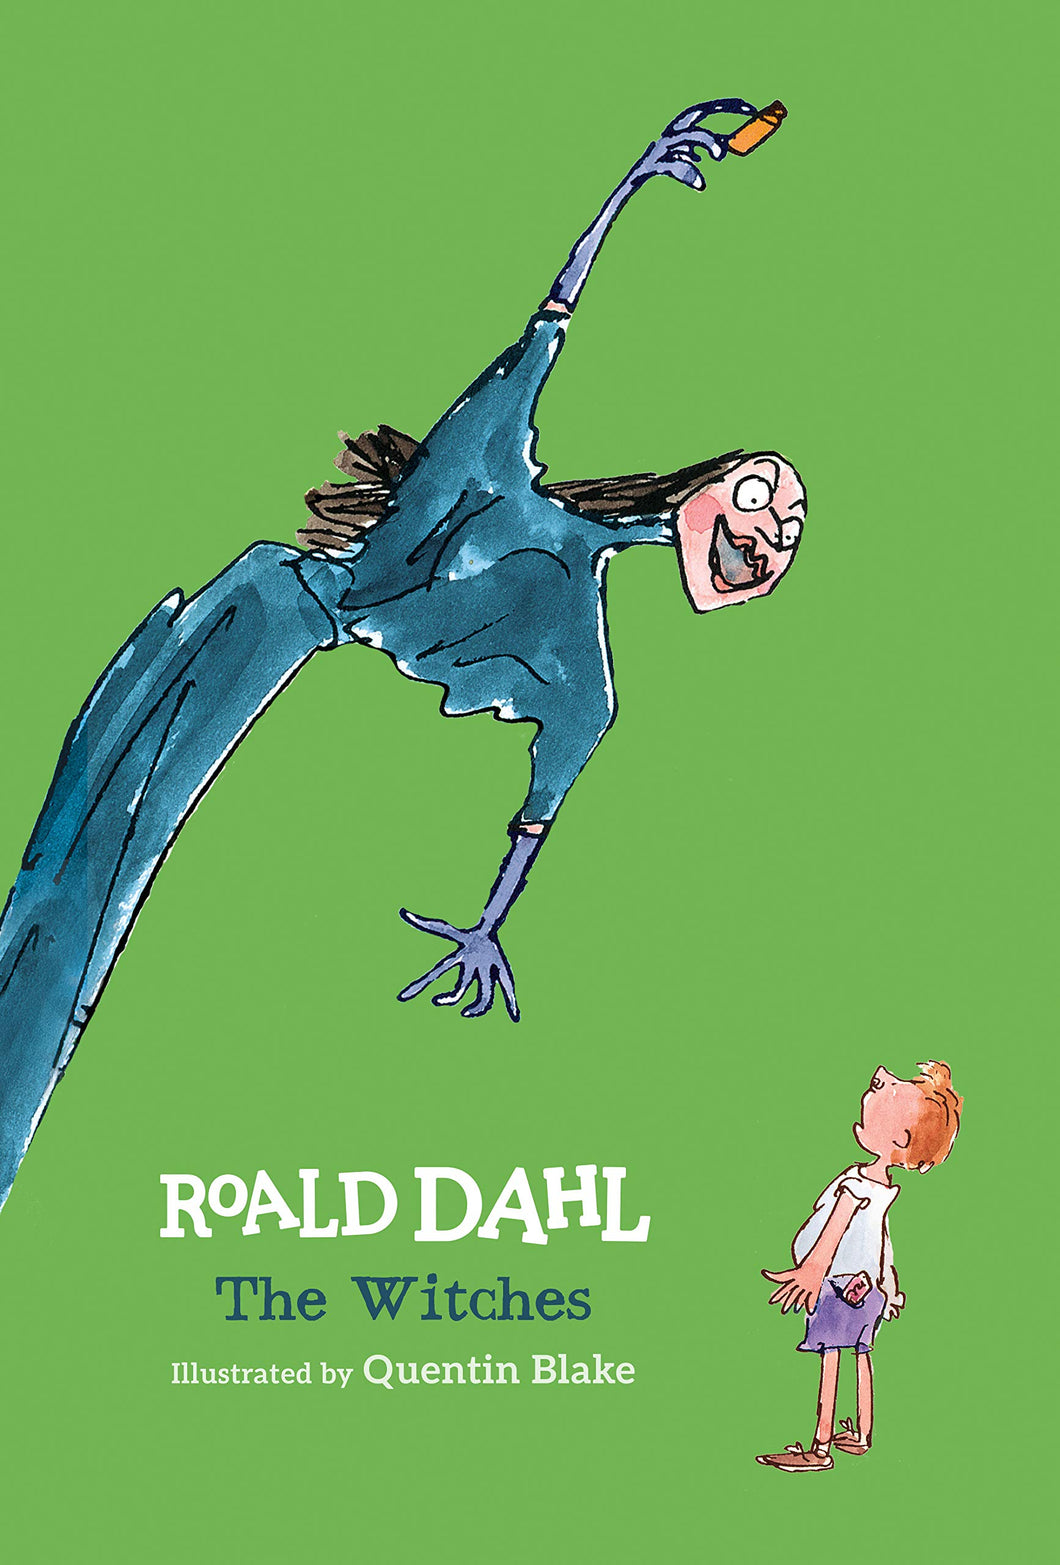 The Witches  by, Roald Dahl   Illustrated by, Quentin Blake